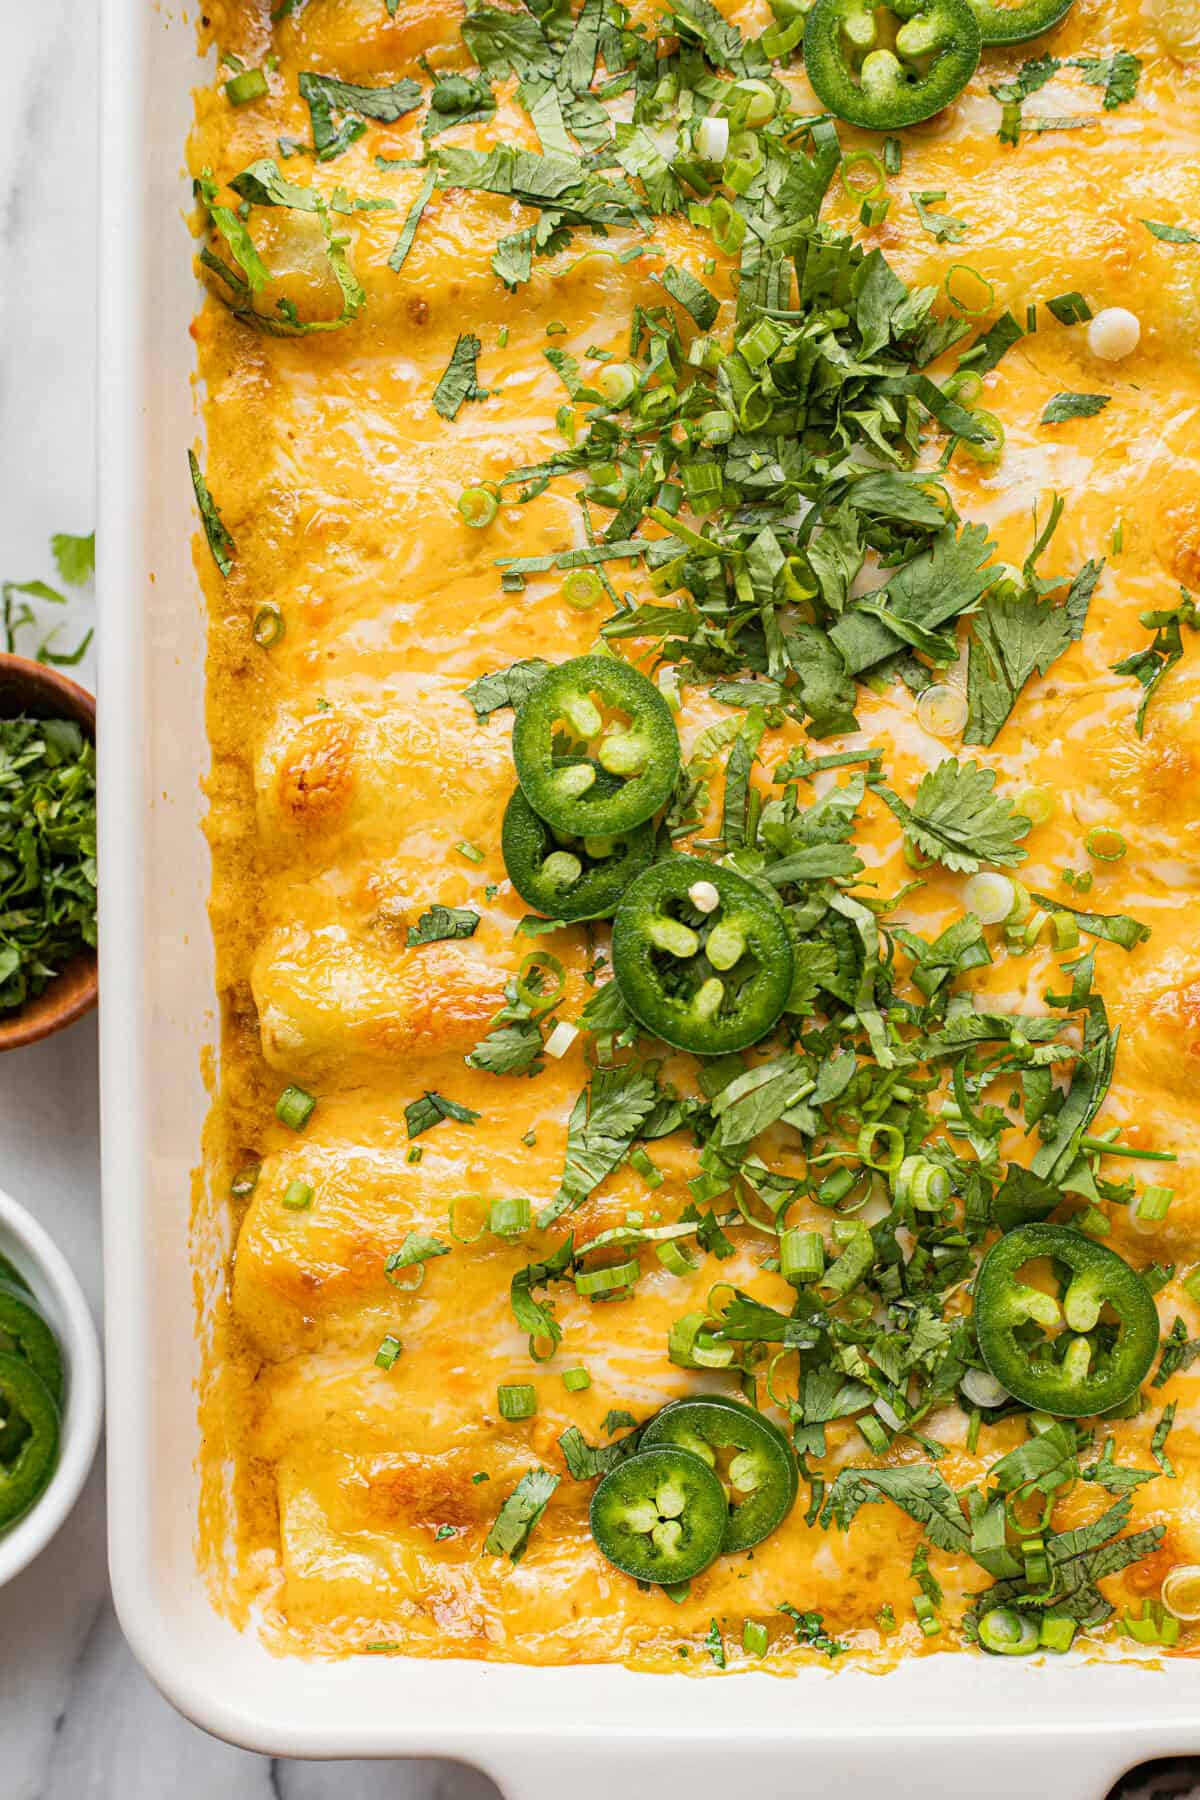 White baking dish filled with homemade chicken enchiladas garnished with cilantro.